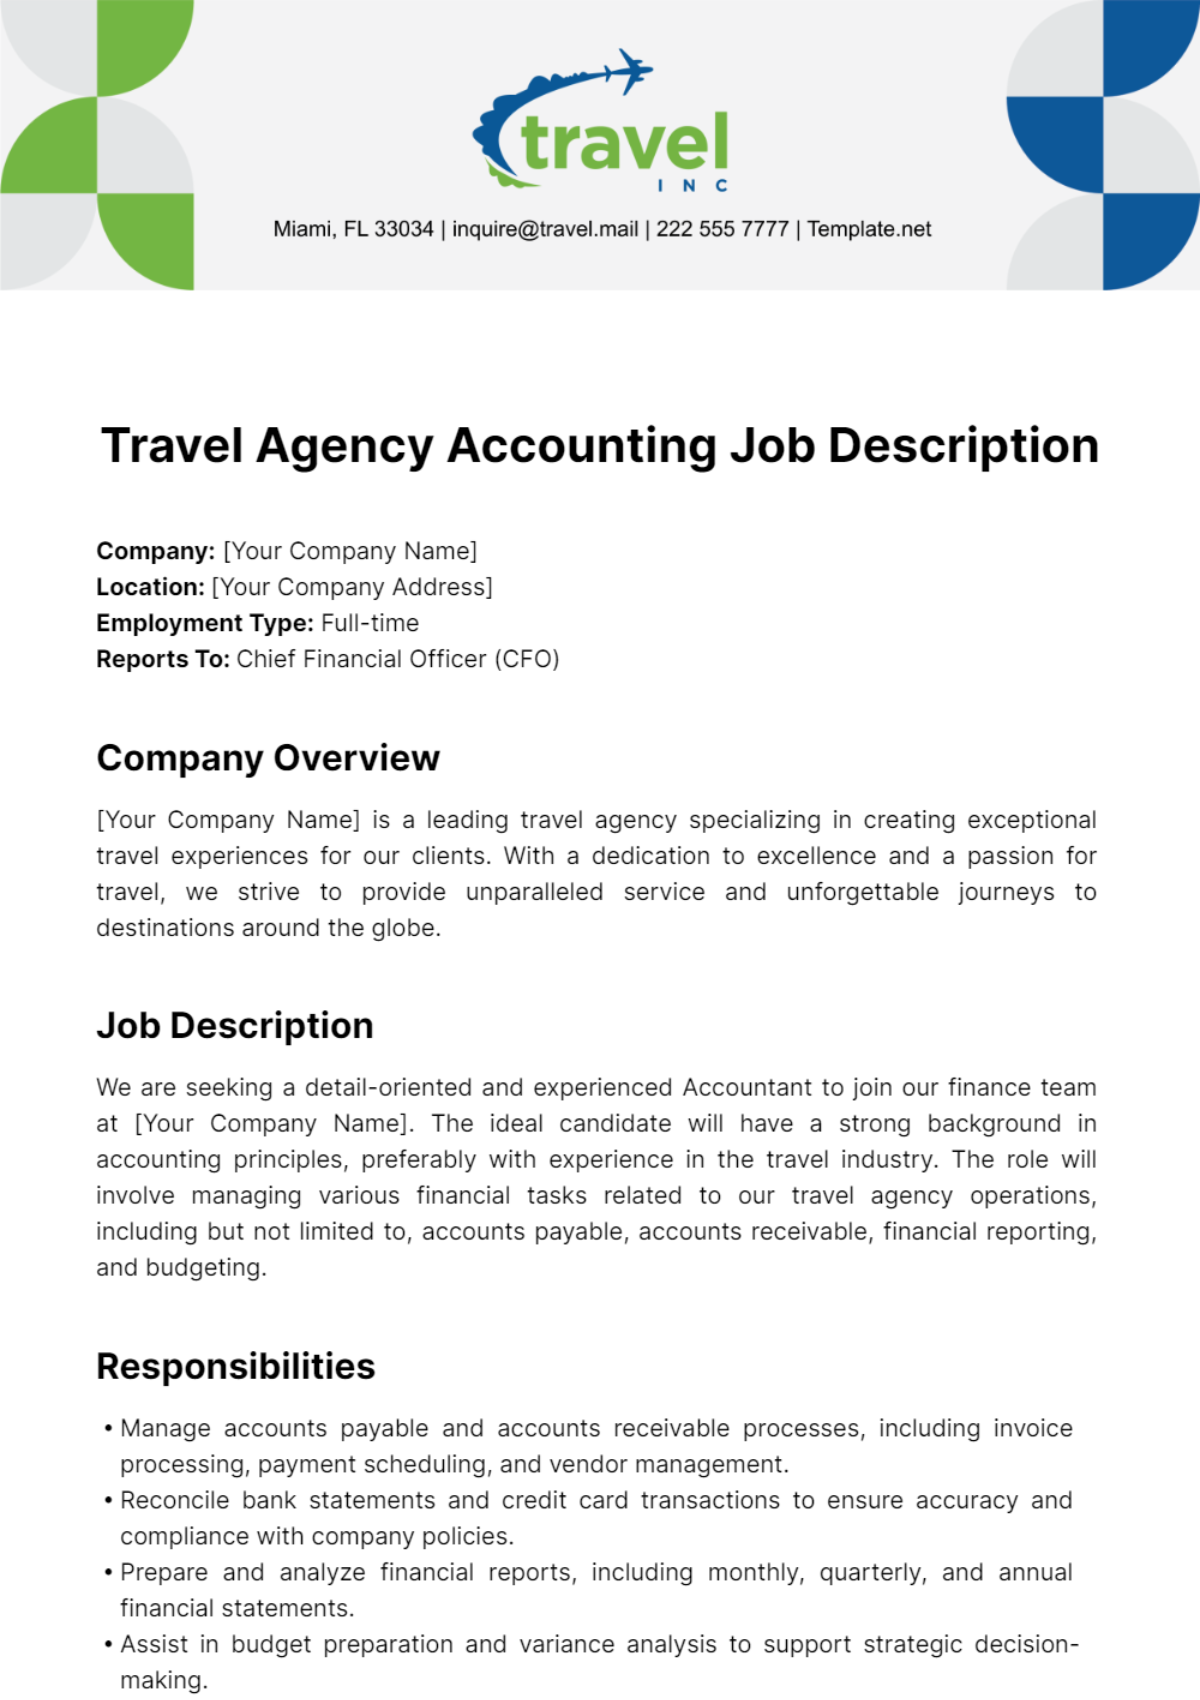 Free Travel Agency Accounting Job Description Template